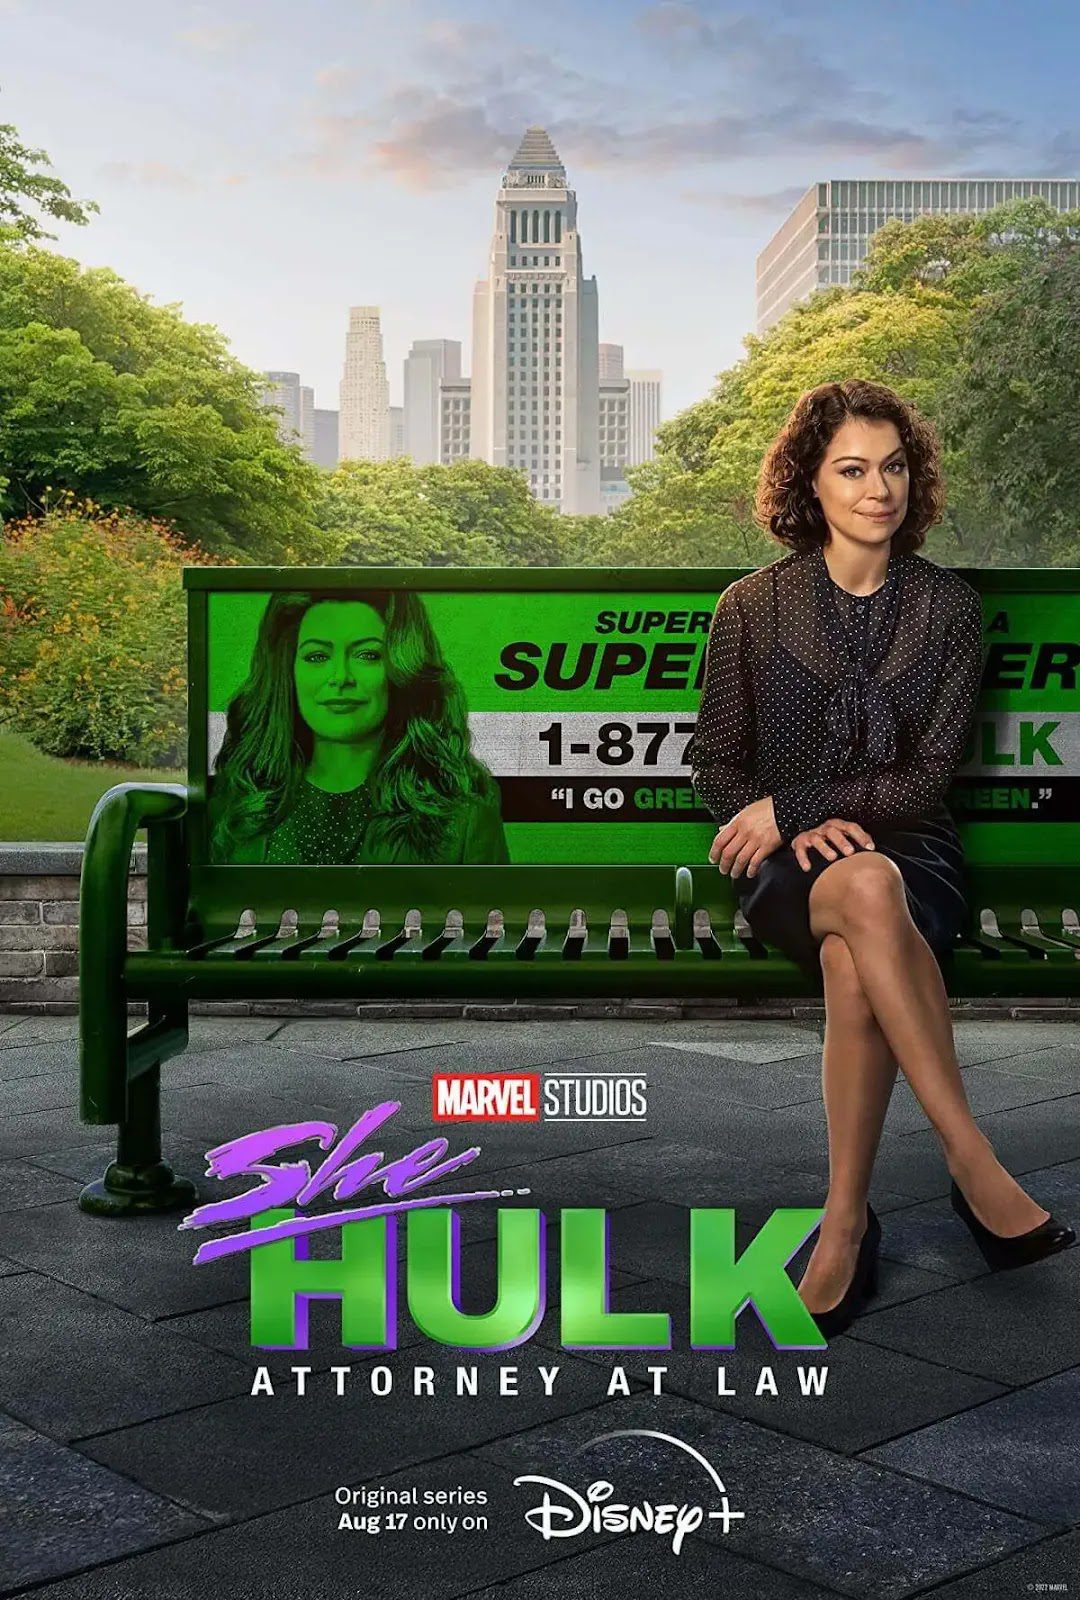 She-Hulk Episode 3 Attorney at Law HD 720p HEVC x265 Esubs [Dual Audio] [Hindi – English] Download Link